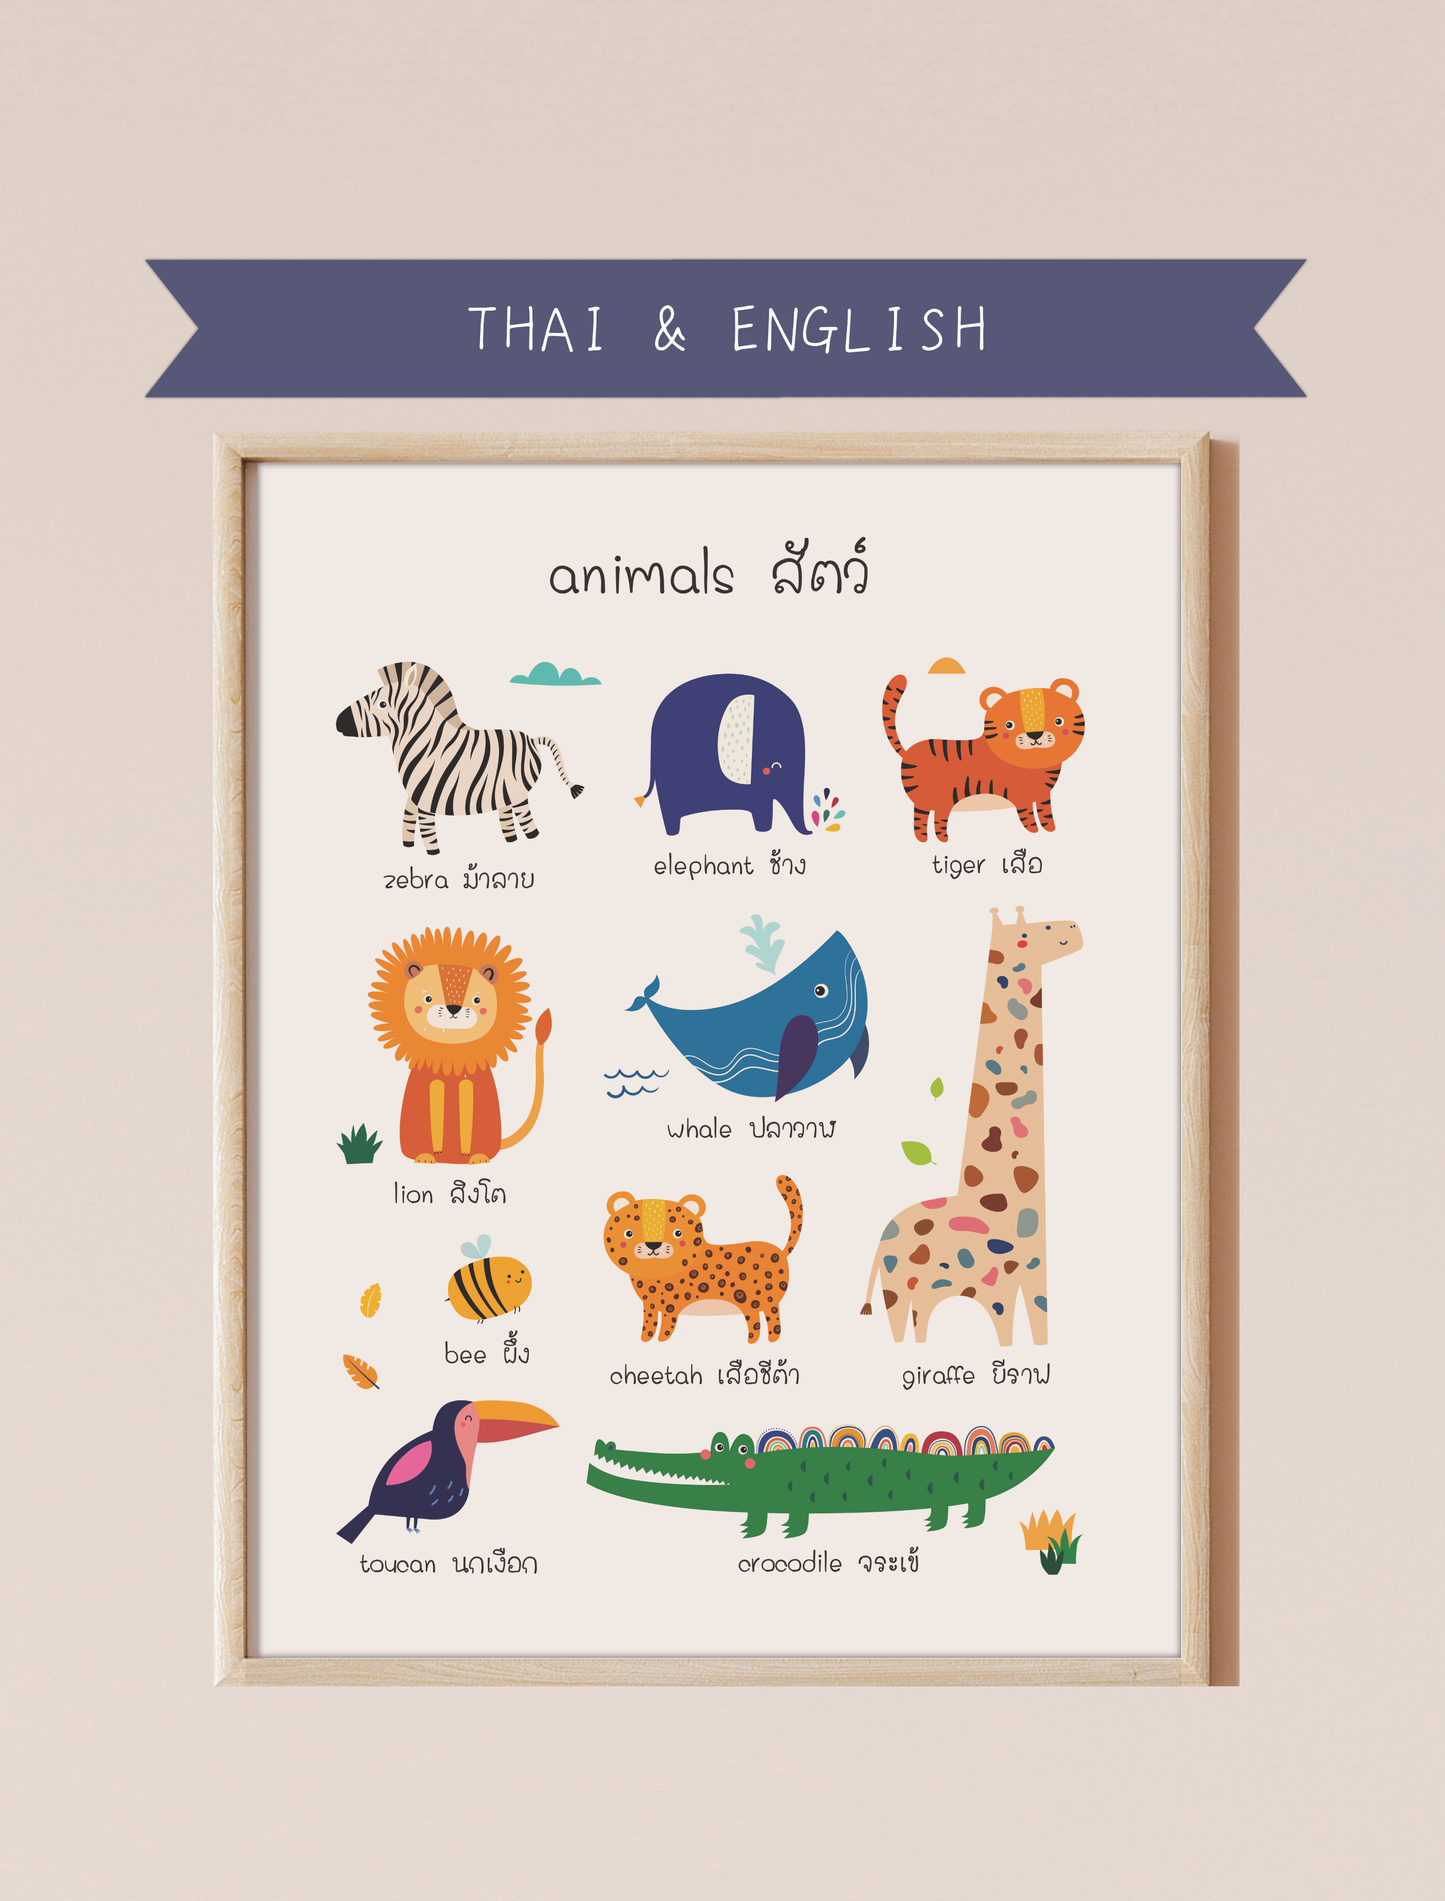 A bilingual educational print featuring animals labeled in English and Thai. The print displays cute, colorful illustrations of the following animals: zebra, elephant, tiger, lion, whale, bee, cheetah, giraffe toucan, and crocodile . This bilingual display aids in language acquisition and cross-cultural learning.